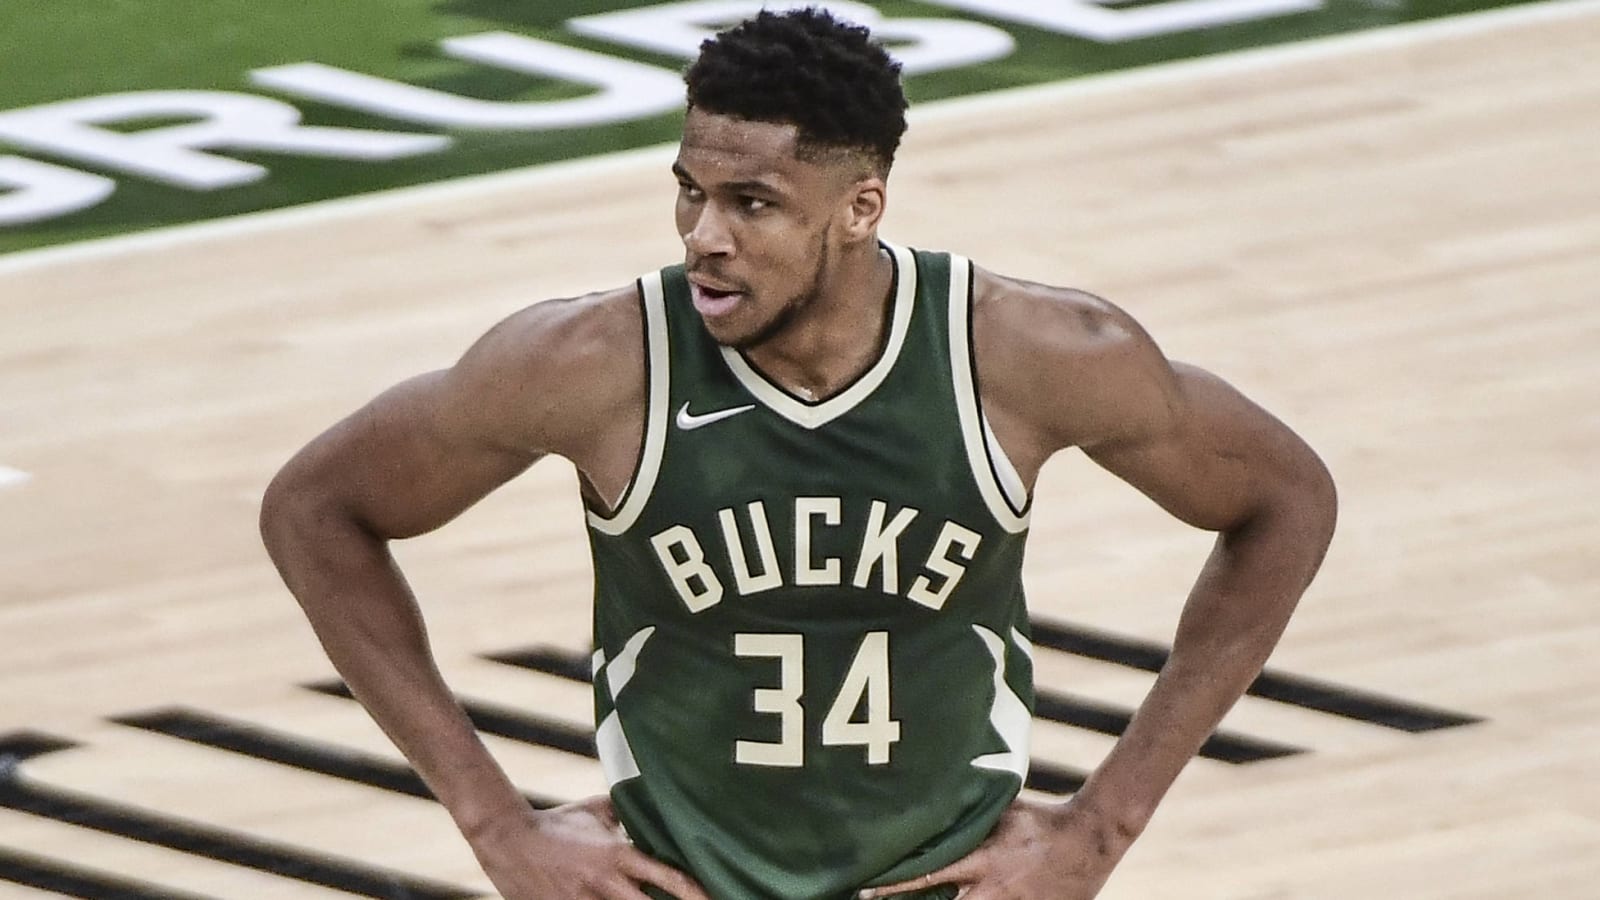 Giannis ‘trying to save energy’ for Bucks' playoff run